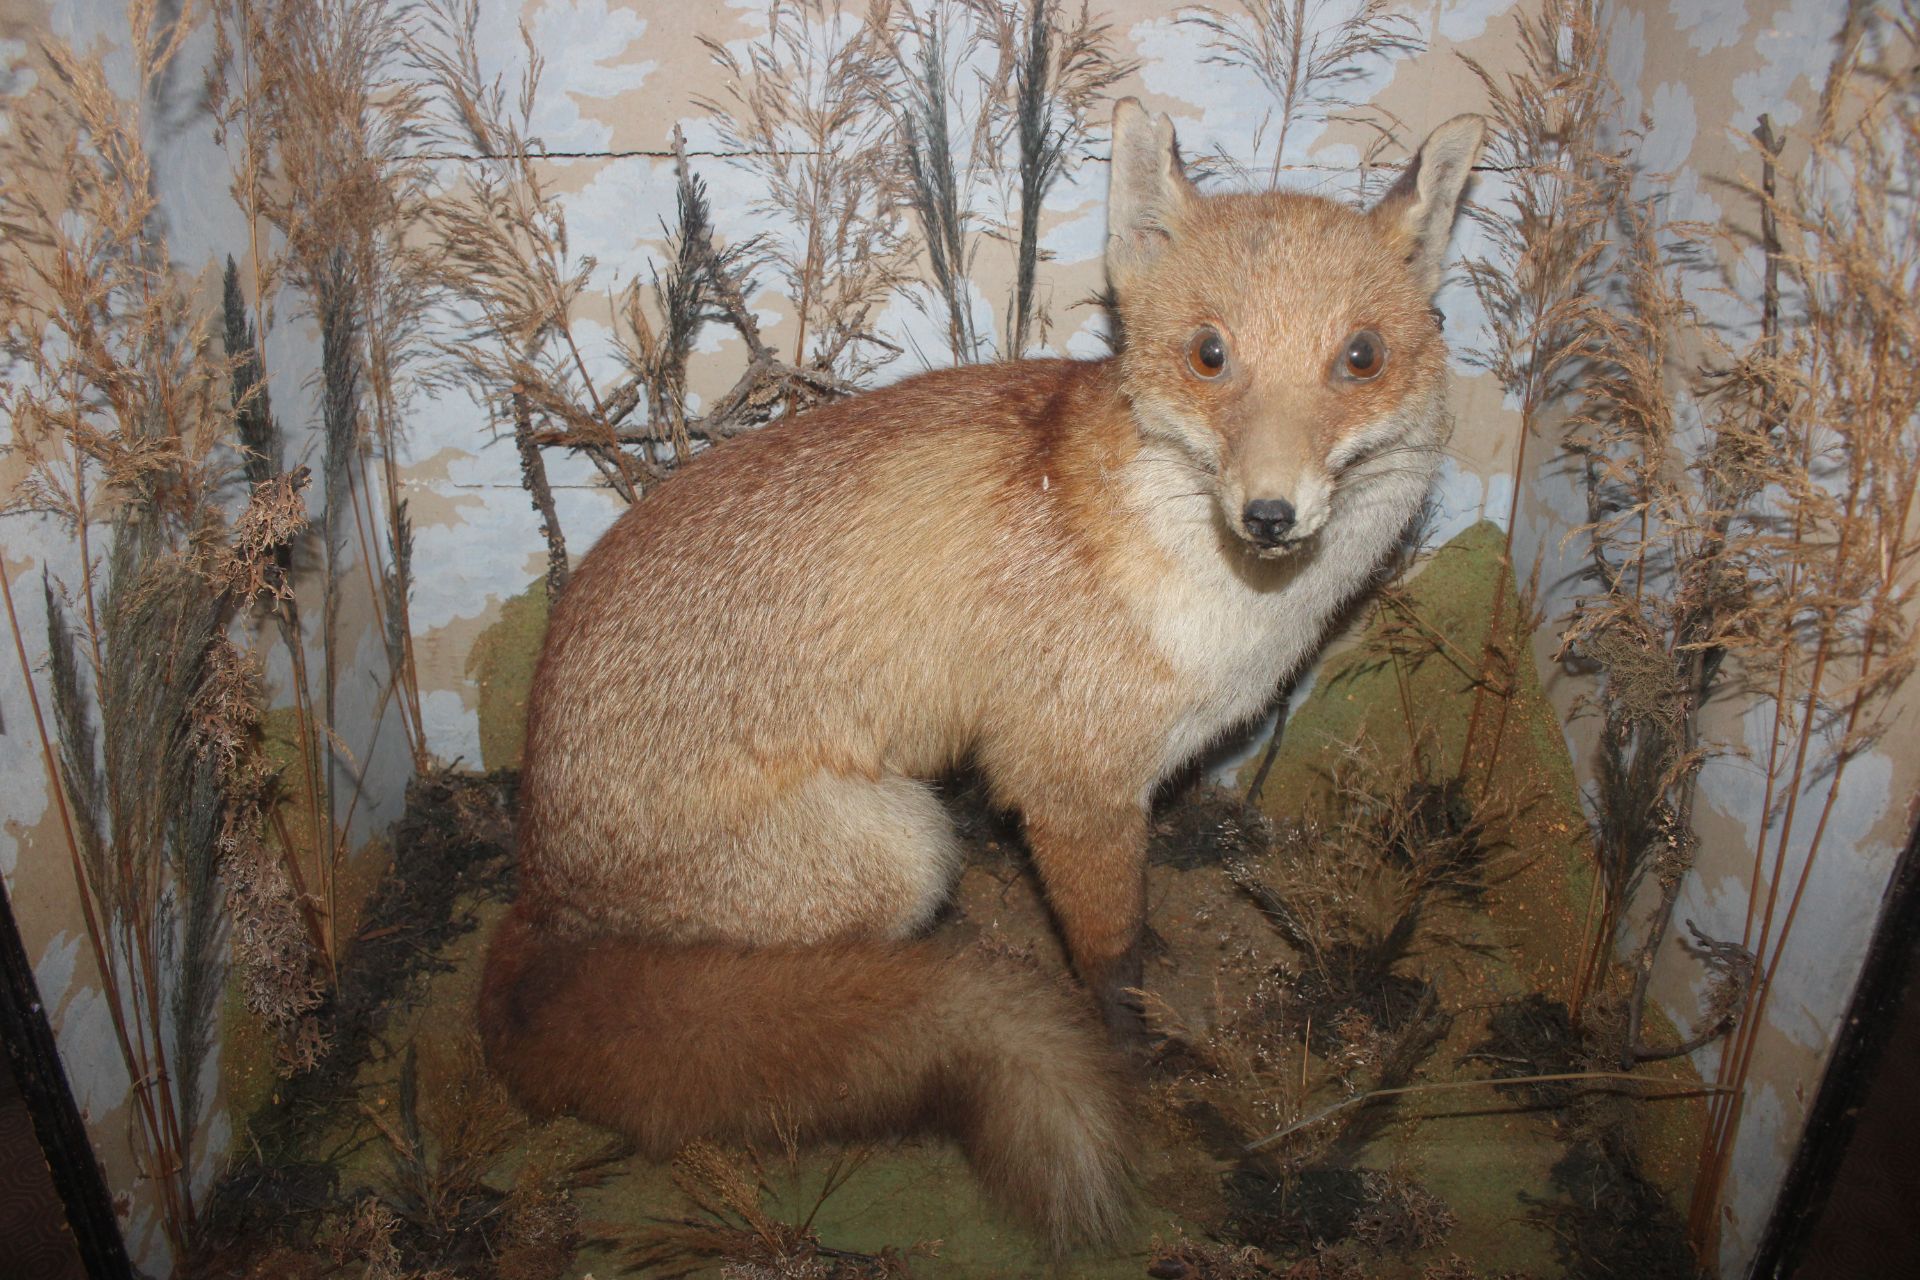 A cased and preserved study of a seated fox amongs - Image 2 of 4